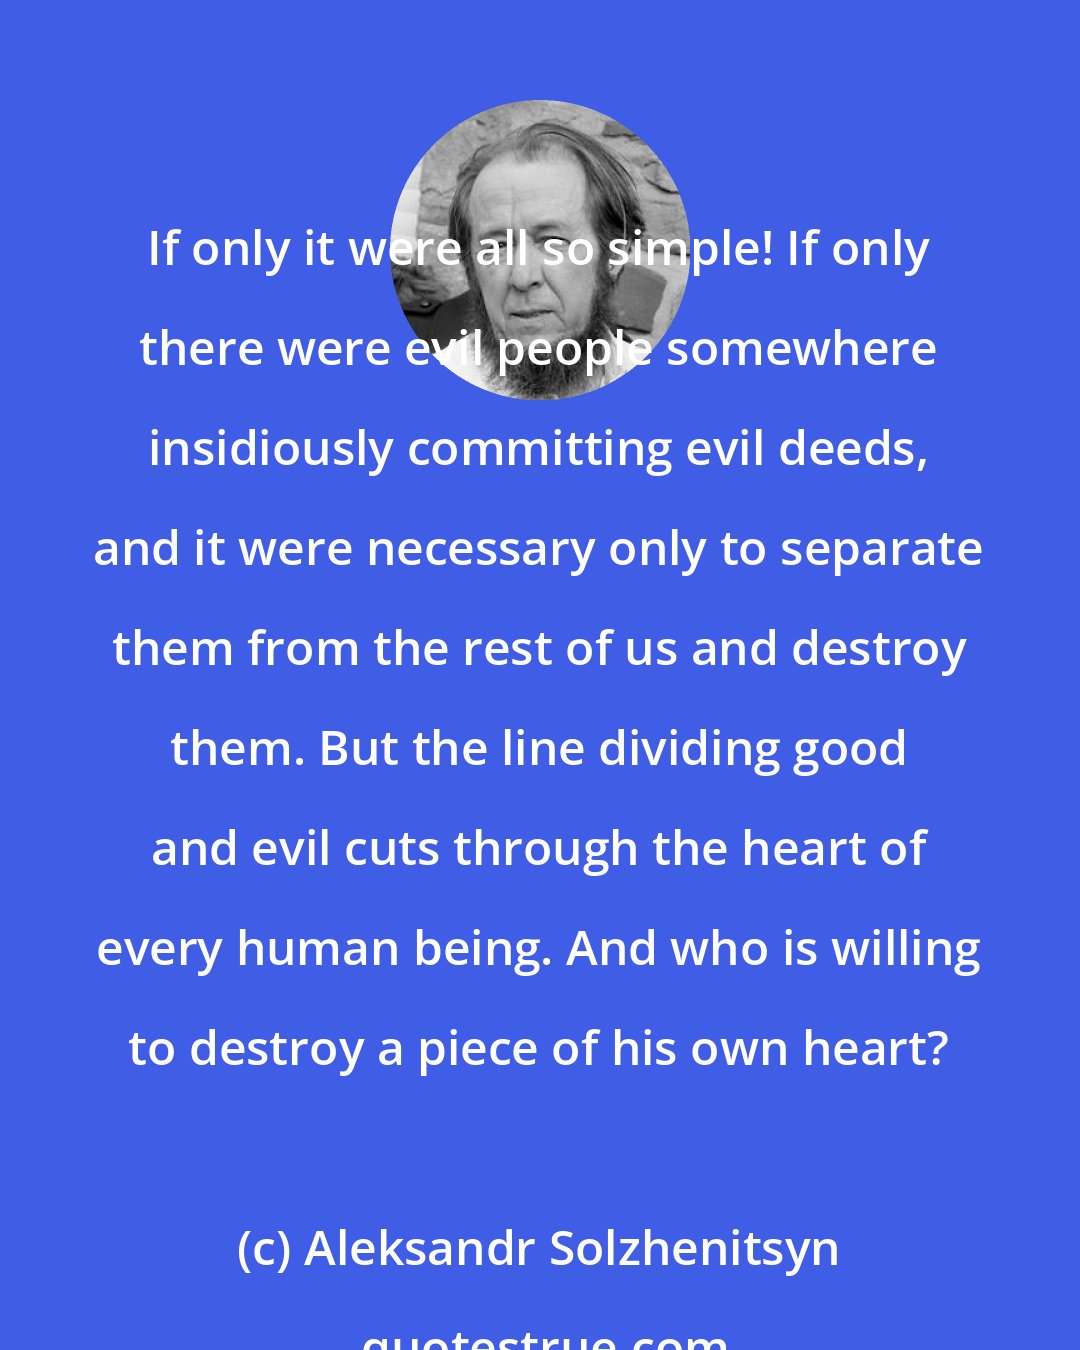 Aleksandr Solzhenitsyn: If only it were all so simple! If only there were evil people somewhere insidiously committing evil deeds, and it were necessary only to separate them from the rest of us and destroy them. But the line dividing good and evil cuts through the heart of every human being. And who is willing to destroy a piece of his own heart?